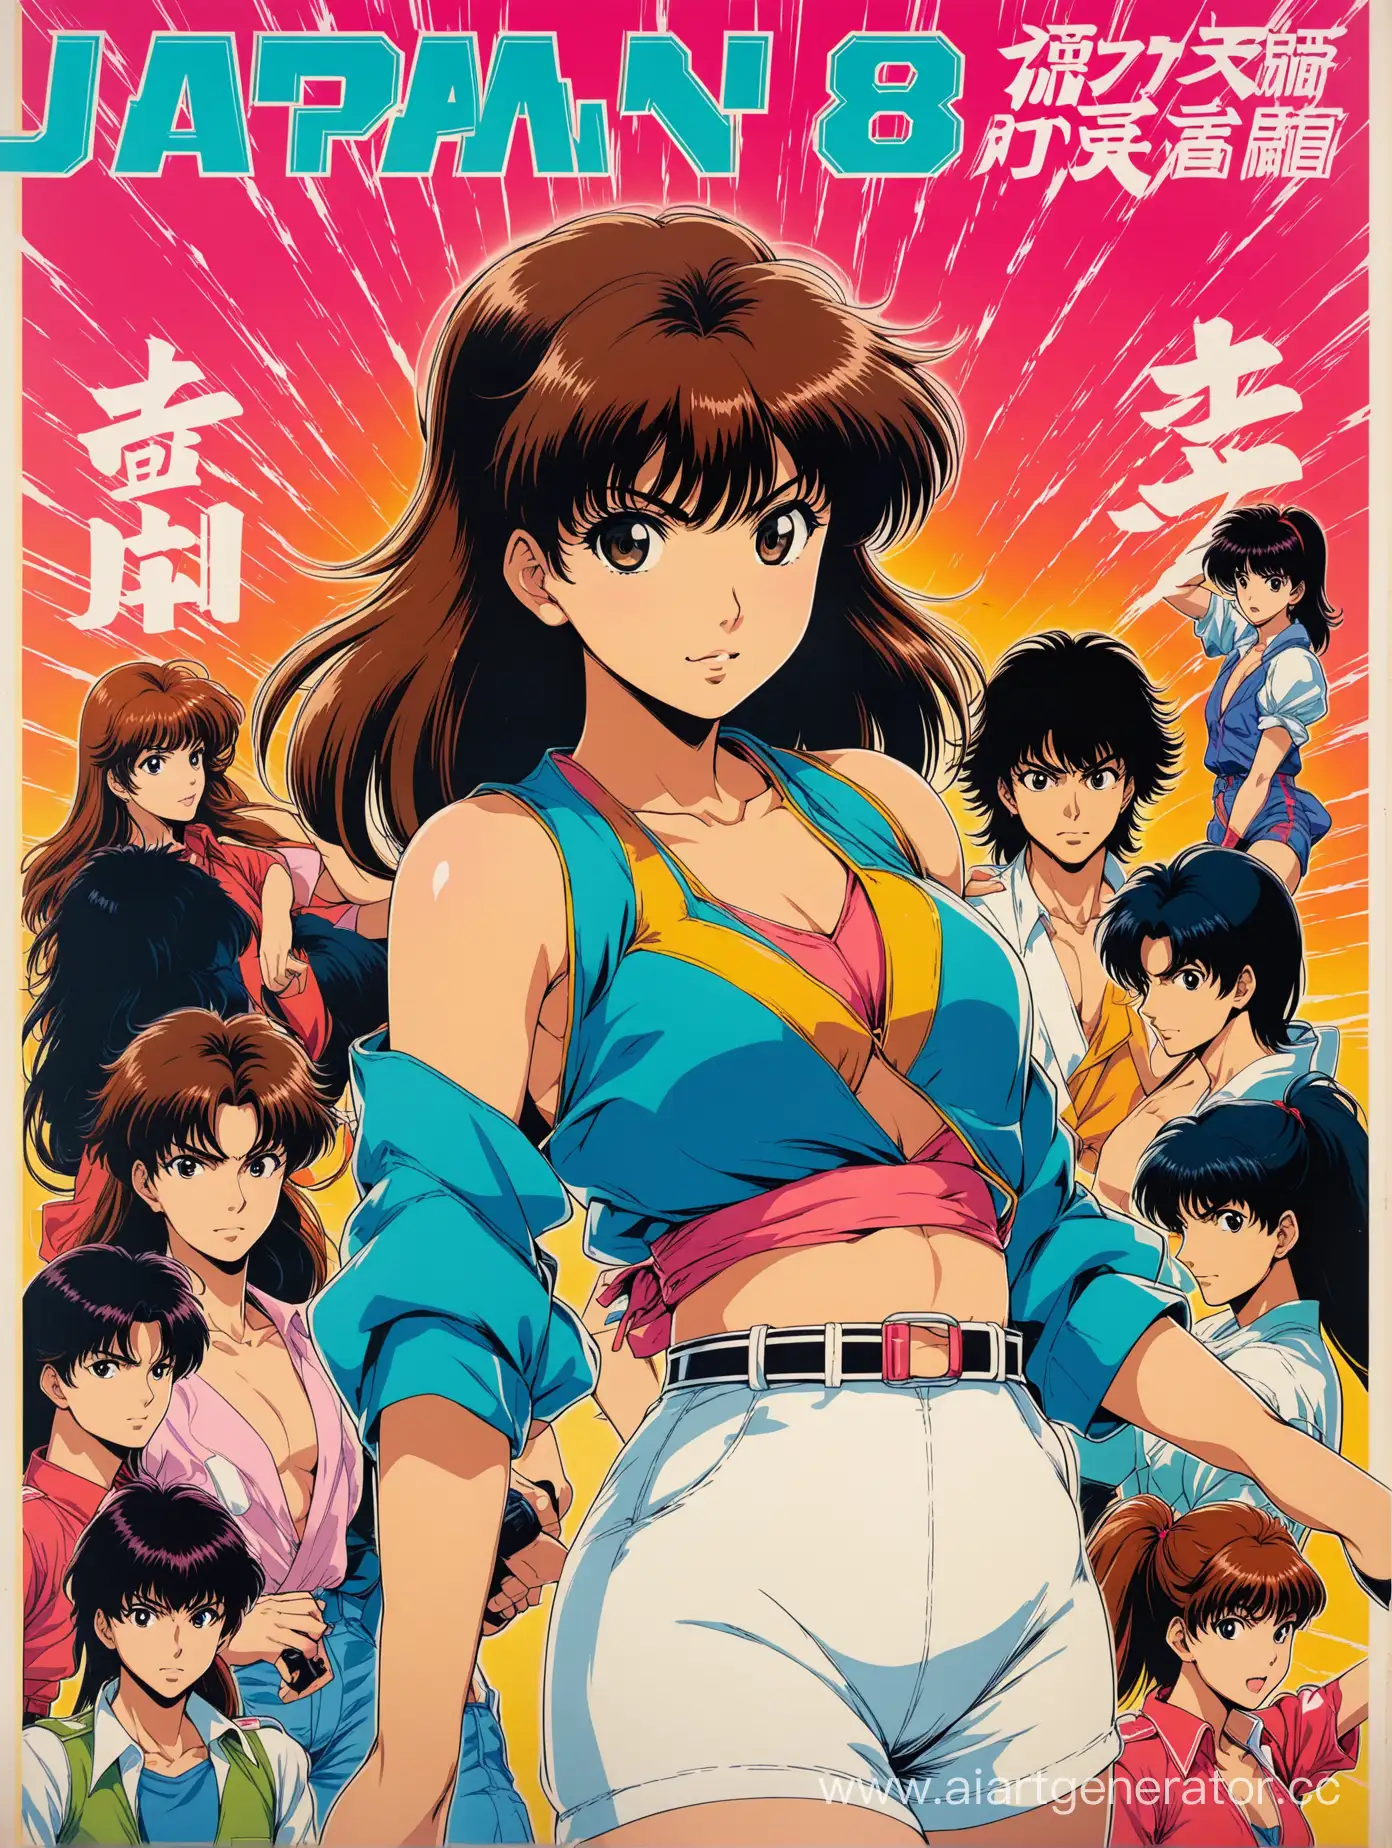 Japan 80s style anime, poster